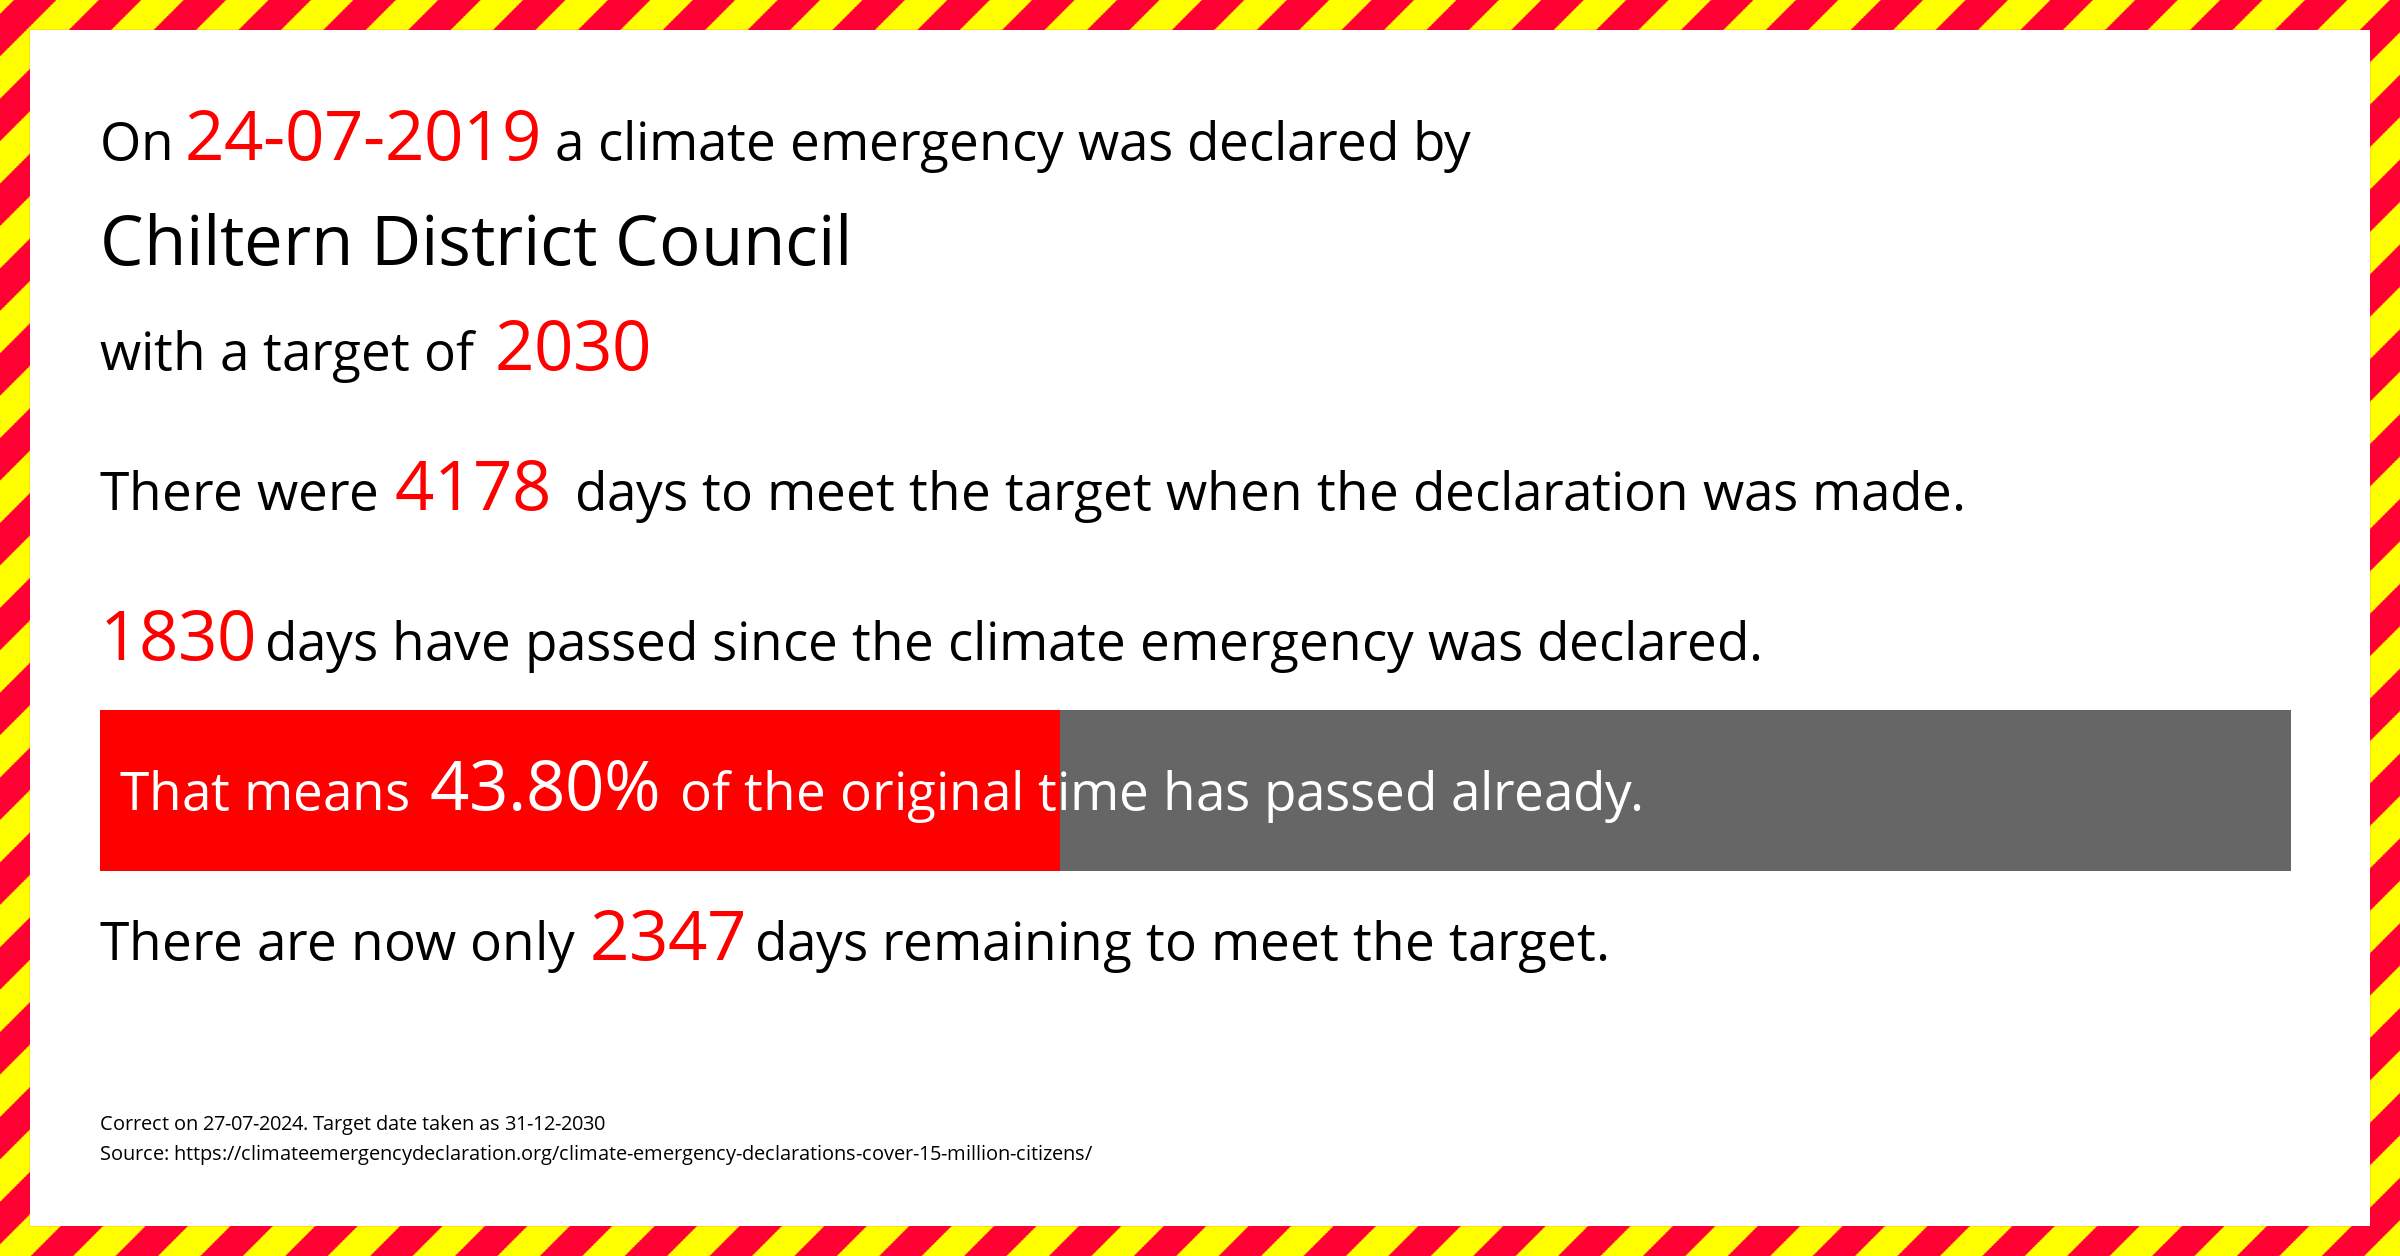 Chiltern District Council declared a Climate emergency on Wednesday 24th July 2019, with a target of 2030.